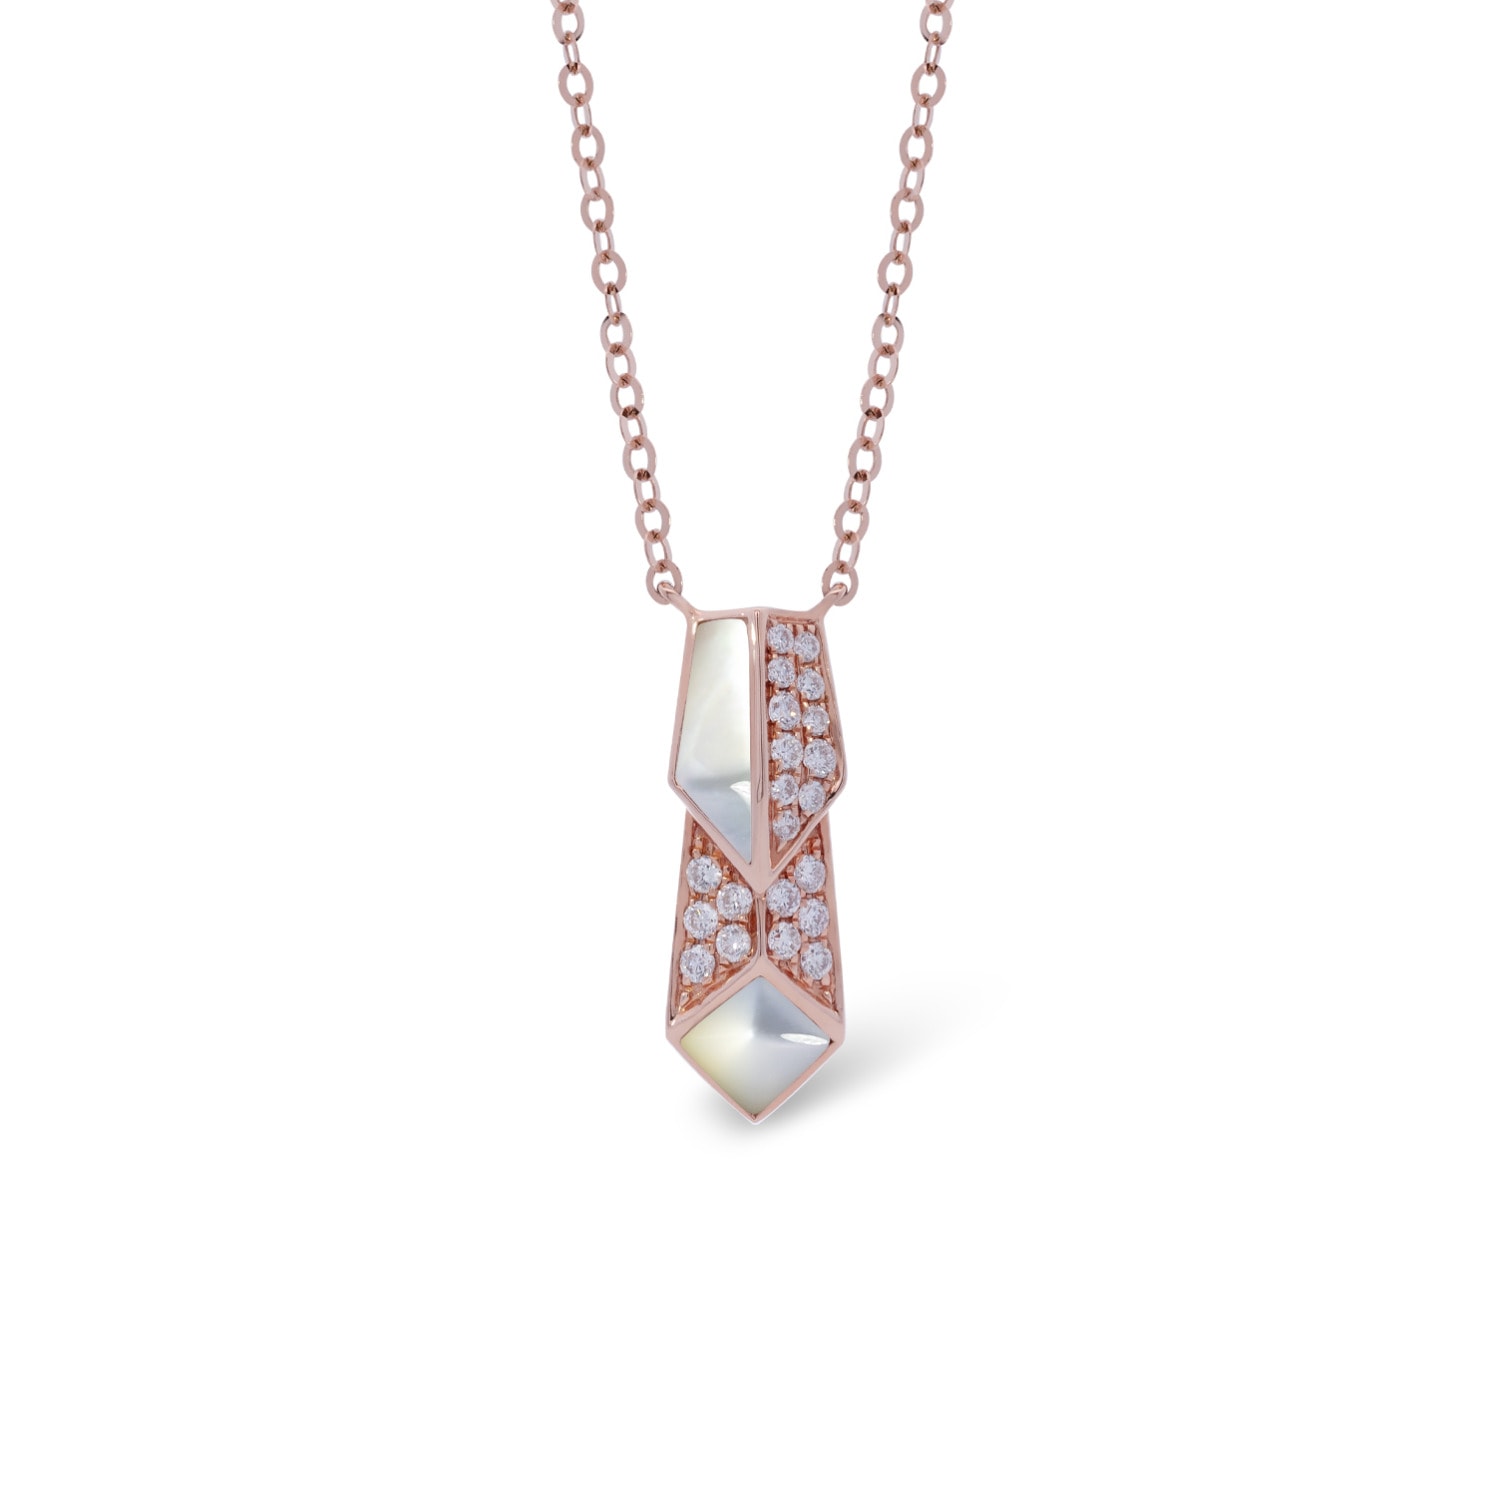 Women’s Rose Gold / White Edgy Arrow Necklace In Solid Rose Gold, Diamond, And White Mother-Of-Pearl Simone Jewels